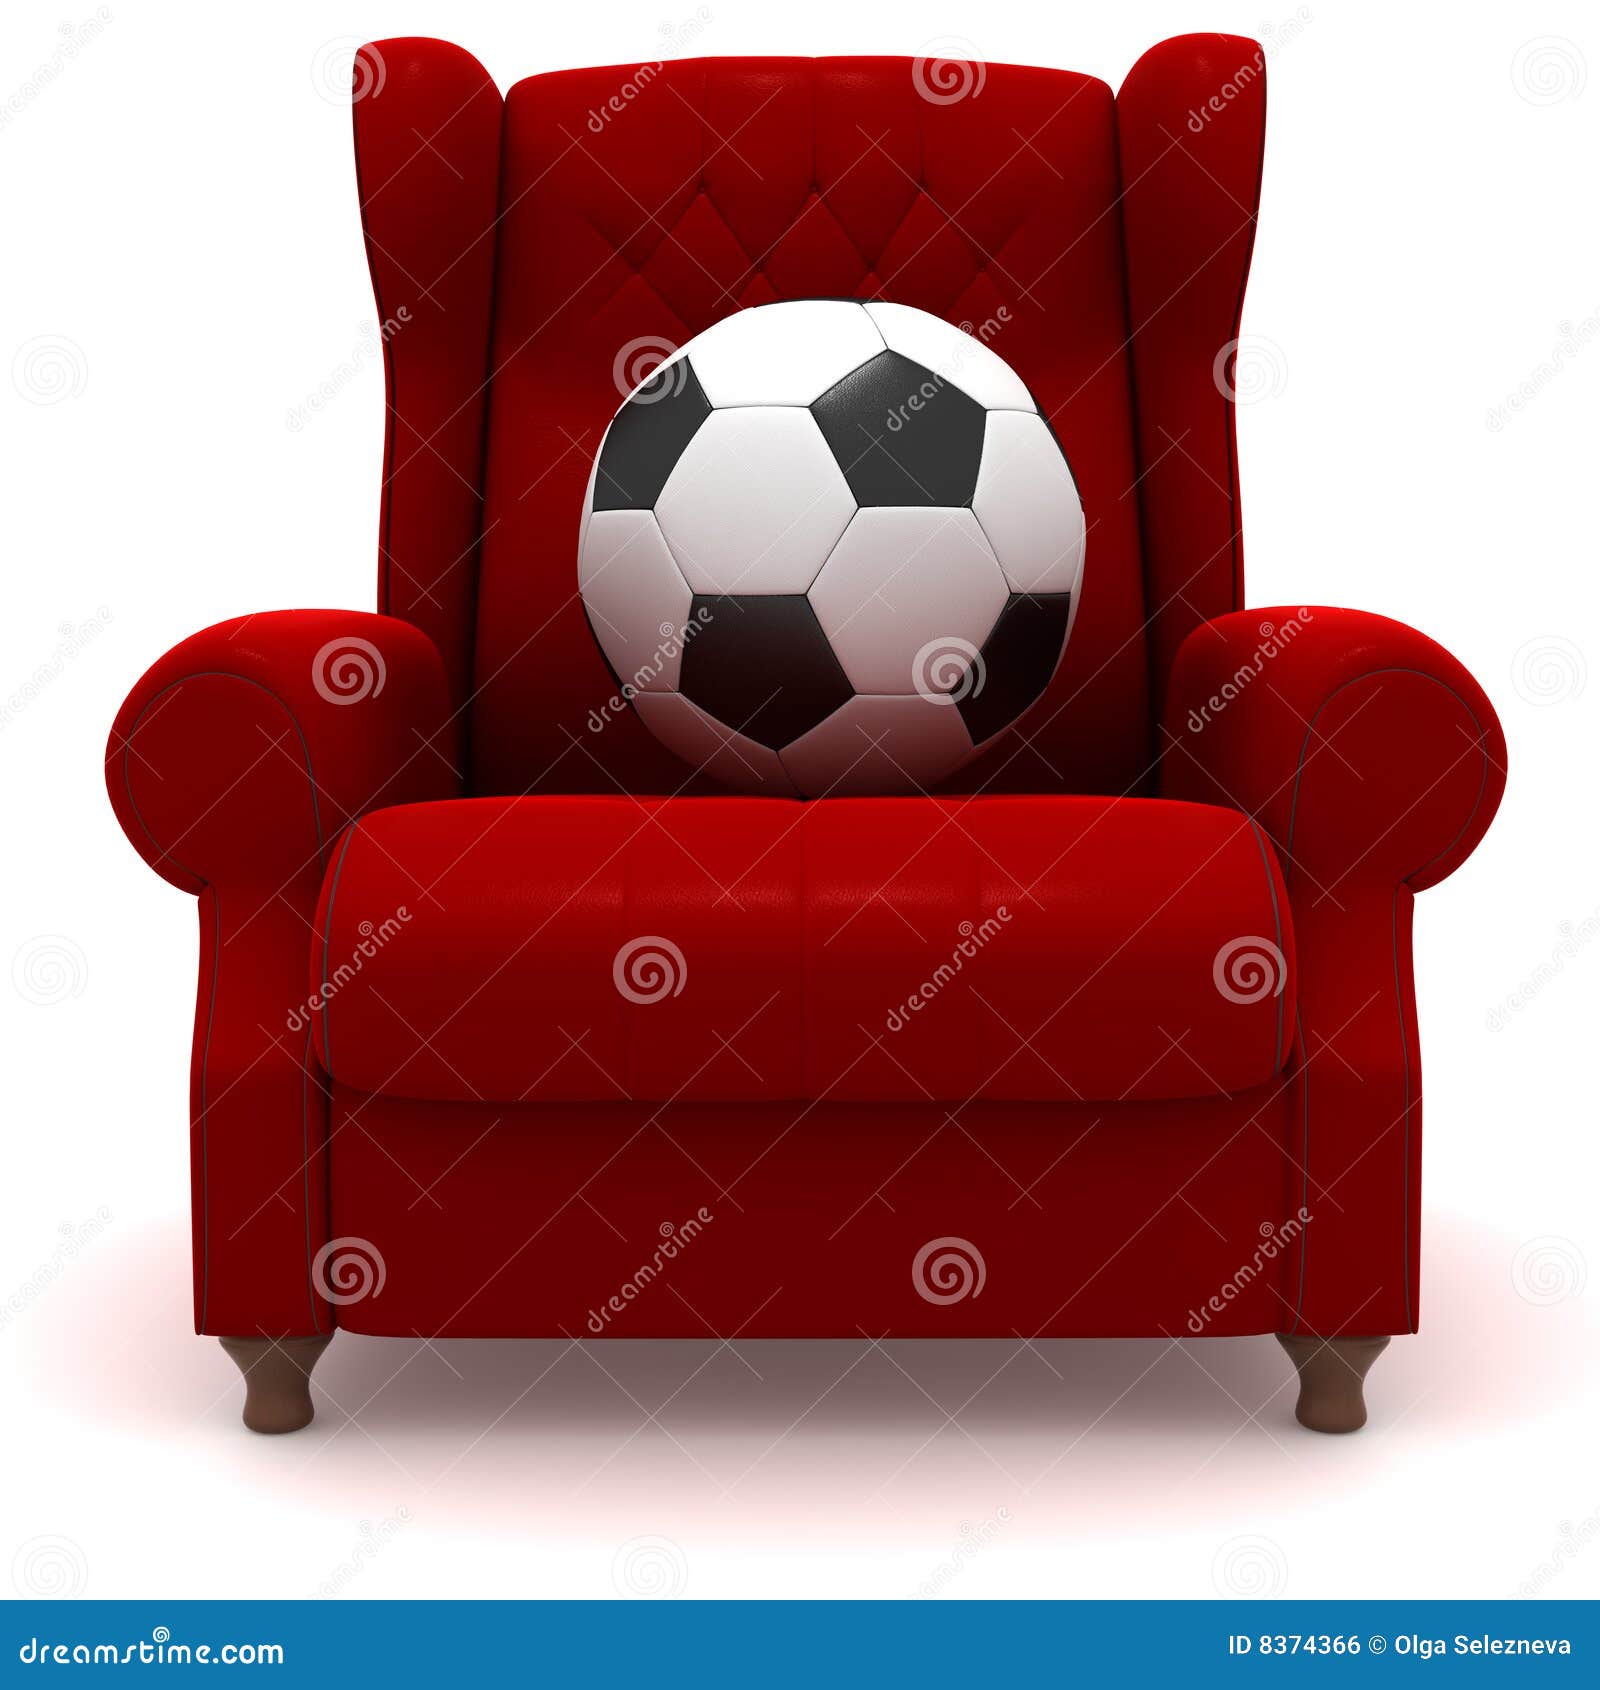 Soccer Ball In Easy Chair Royalty Free Stock Image - Image: 8374366